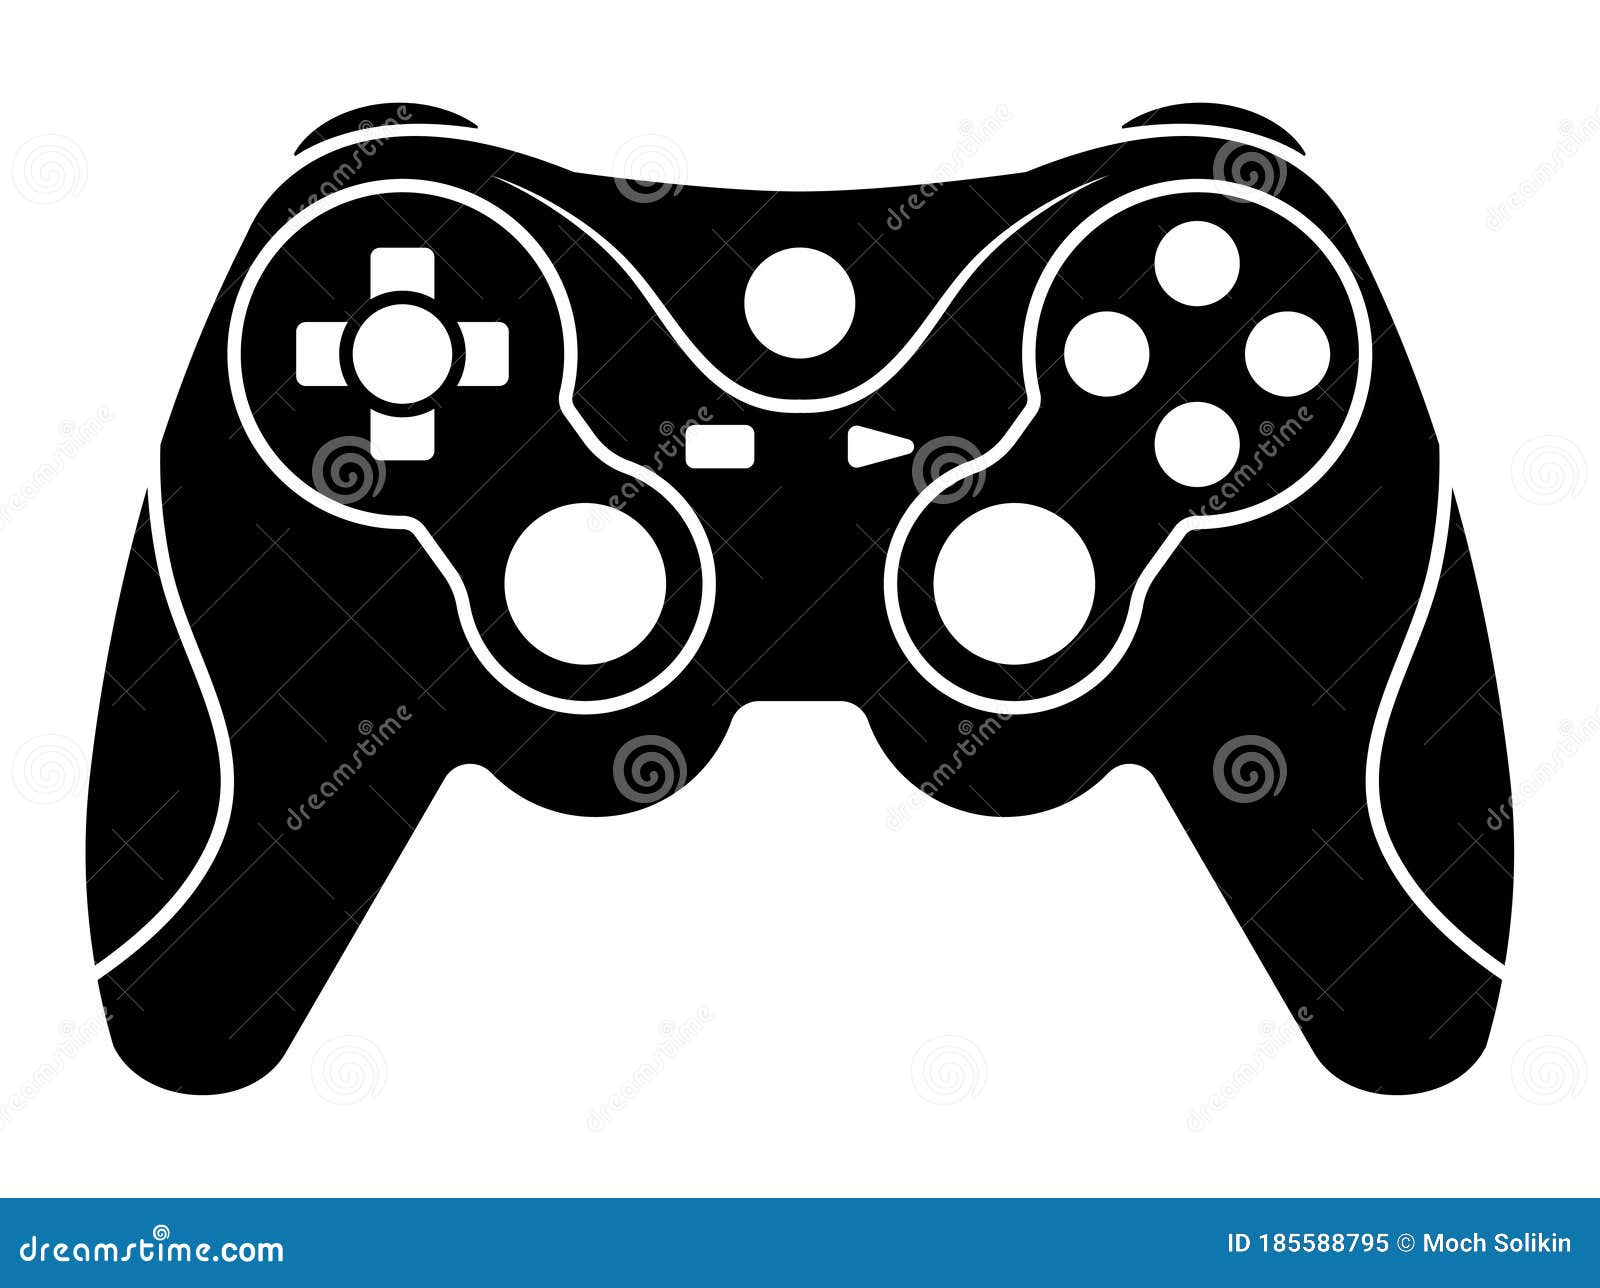 xbox video game controllers or gamepad flat icon for apps and websites